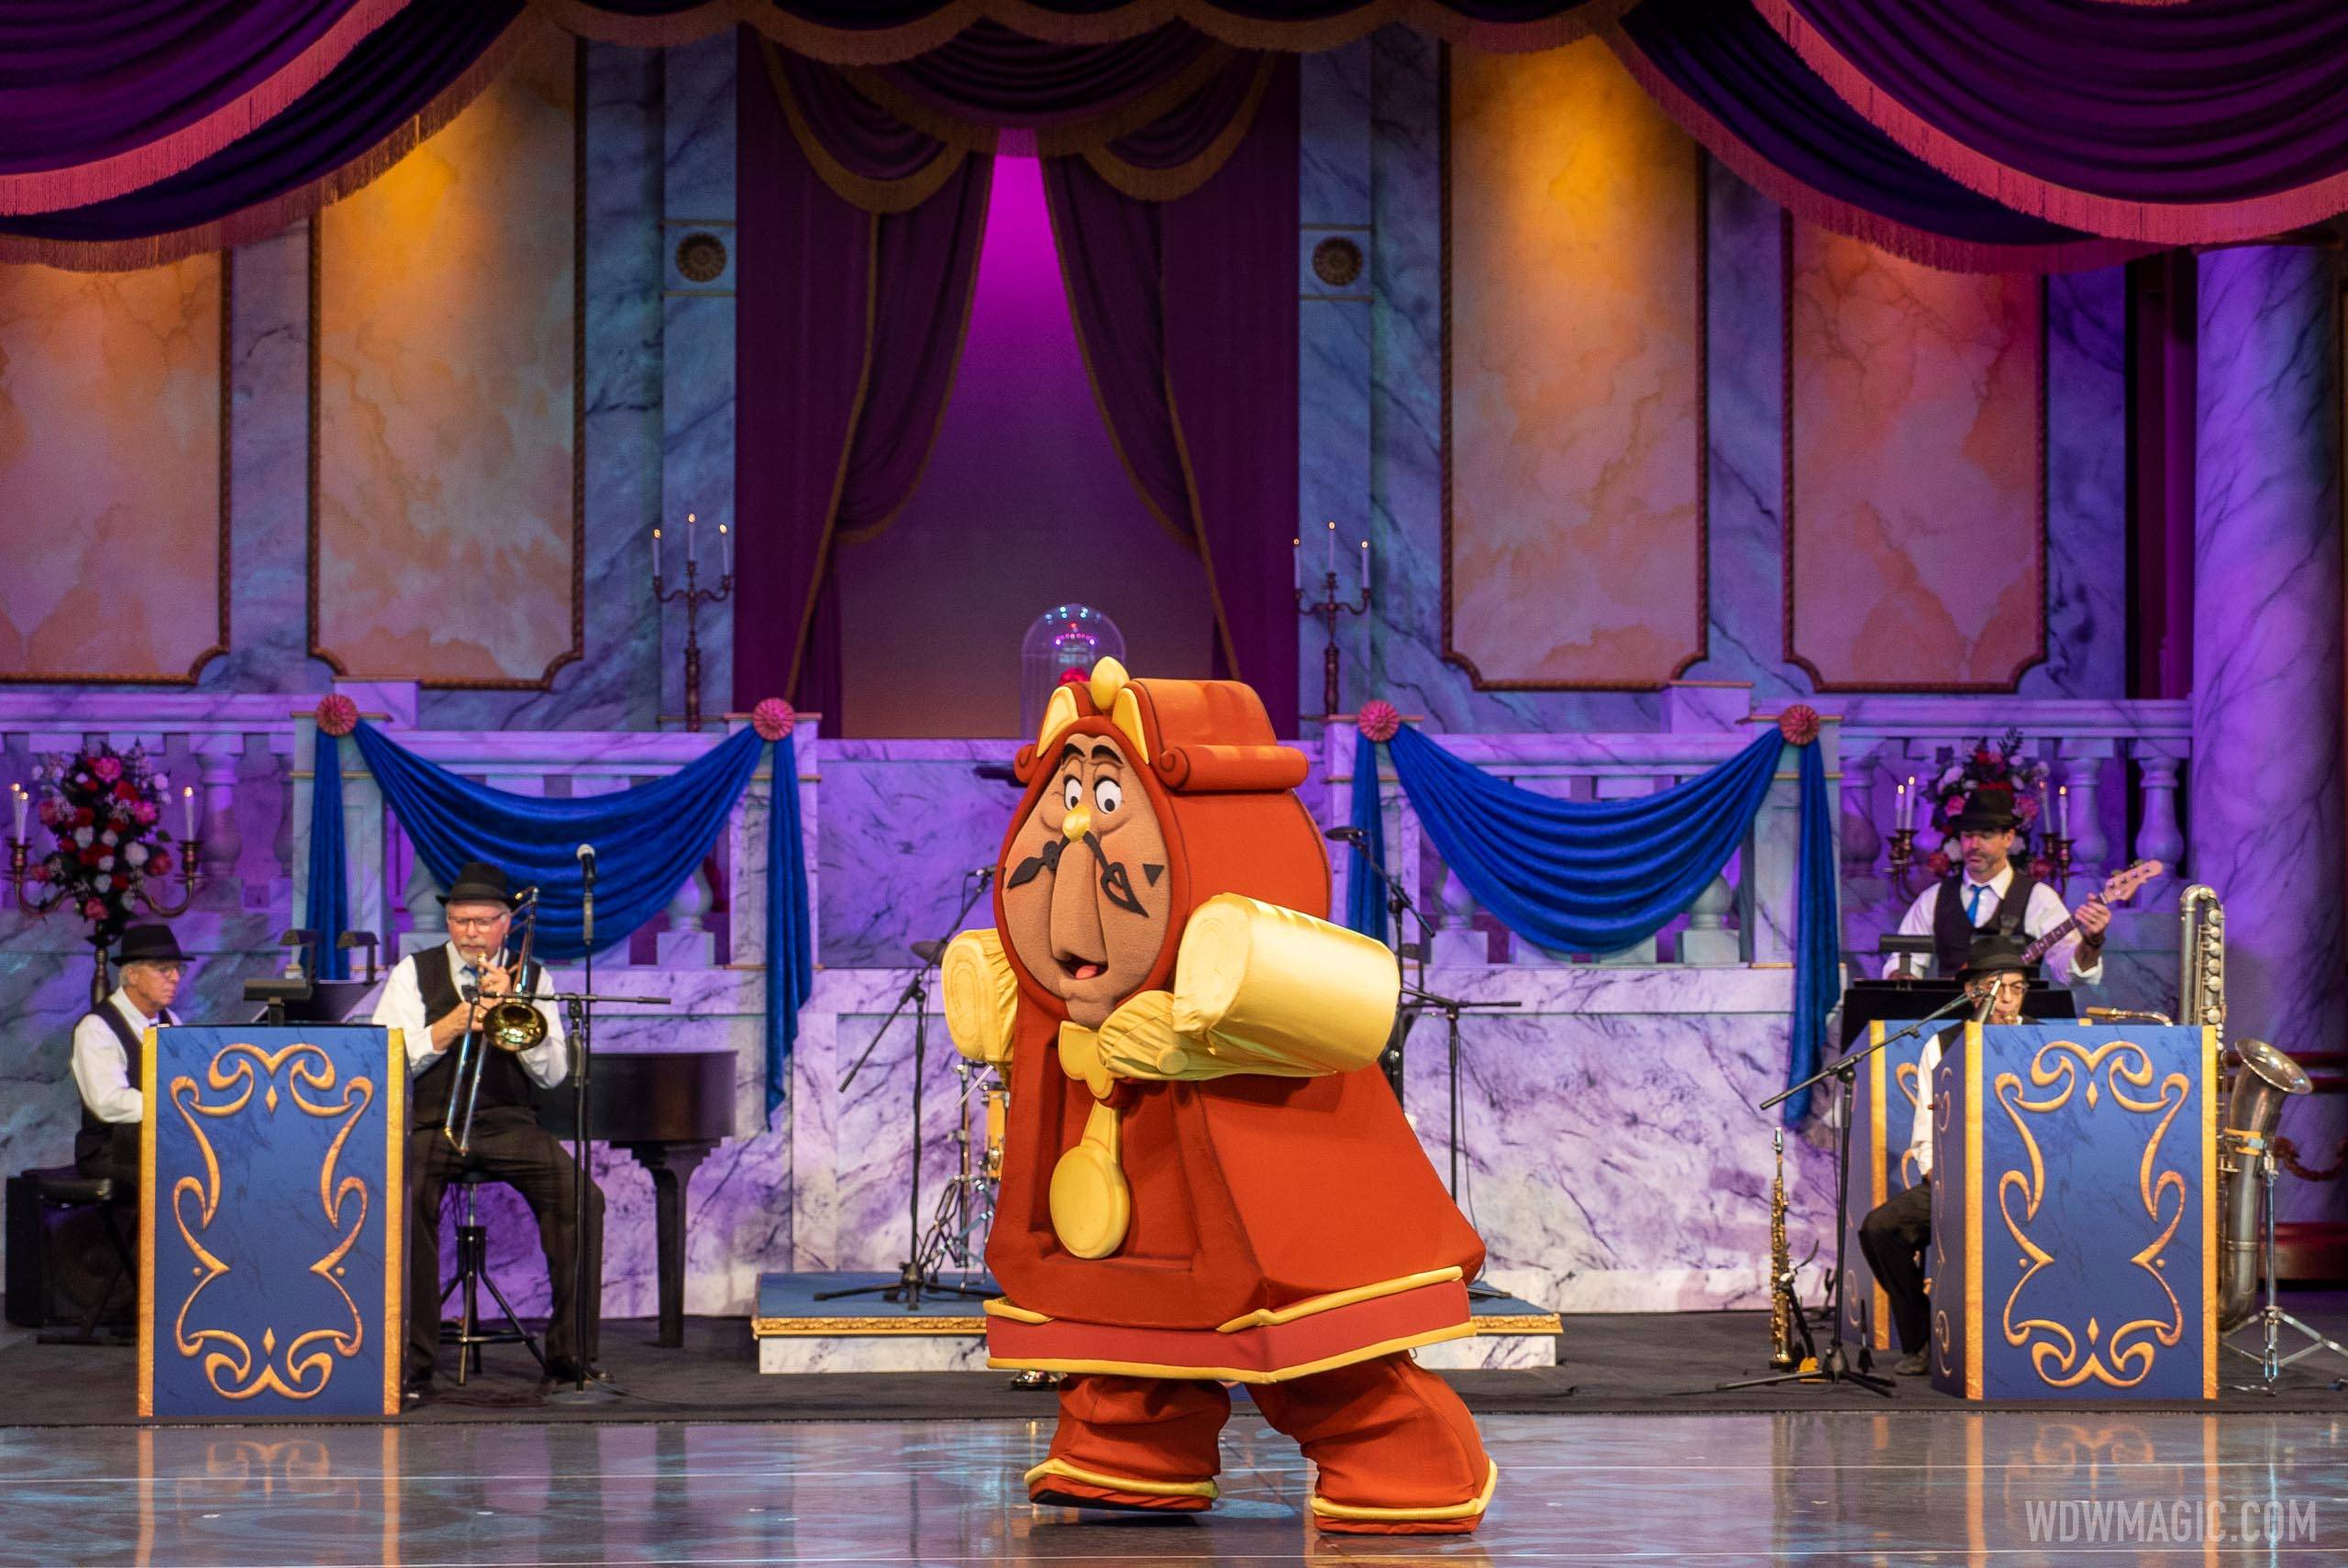 The Disney Society Orchestra and Friends overview